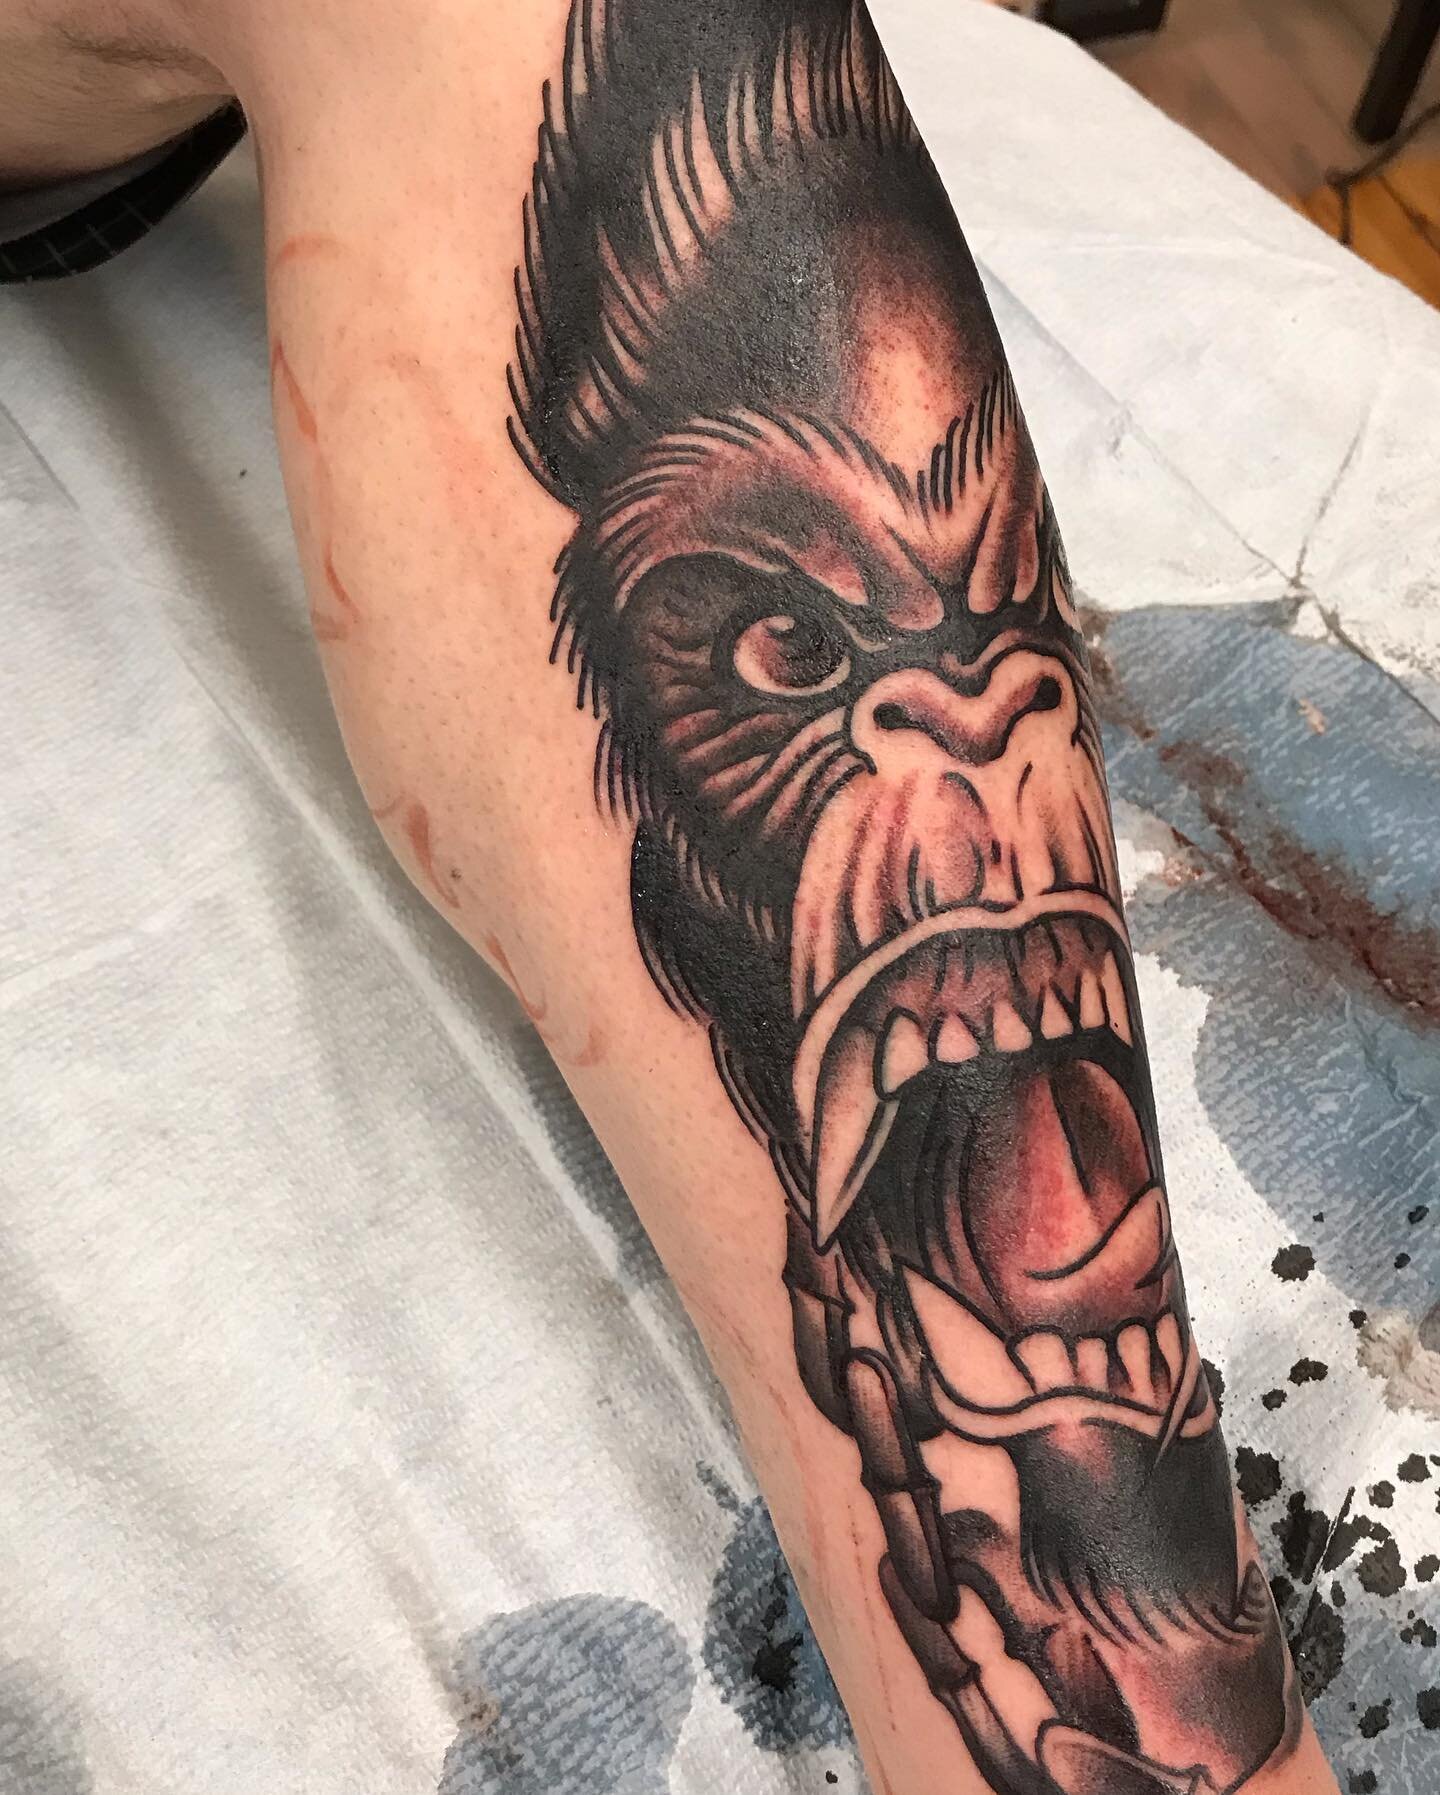 Awesome one shot gorilla, more to come on this bad boy. Thanks Joe! #threeriverstattoo #pittsburghtattooer #awwhellyeah #jasonmcgarrytattoos